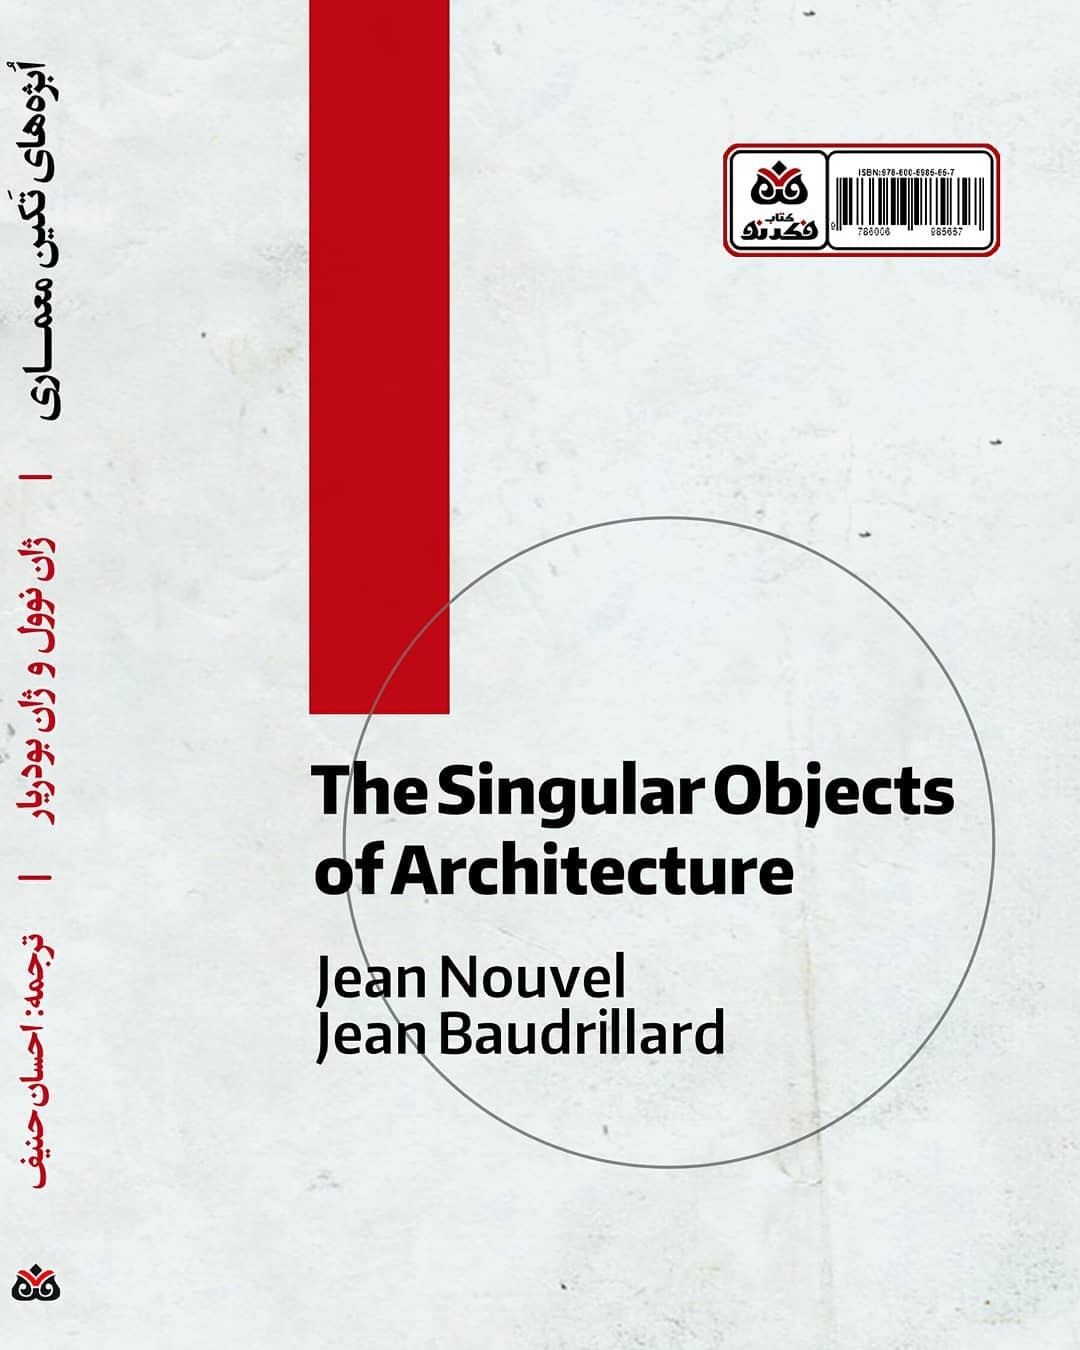 The Singular Objects of Architecture